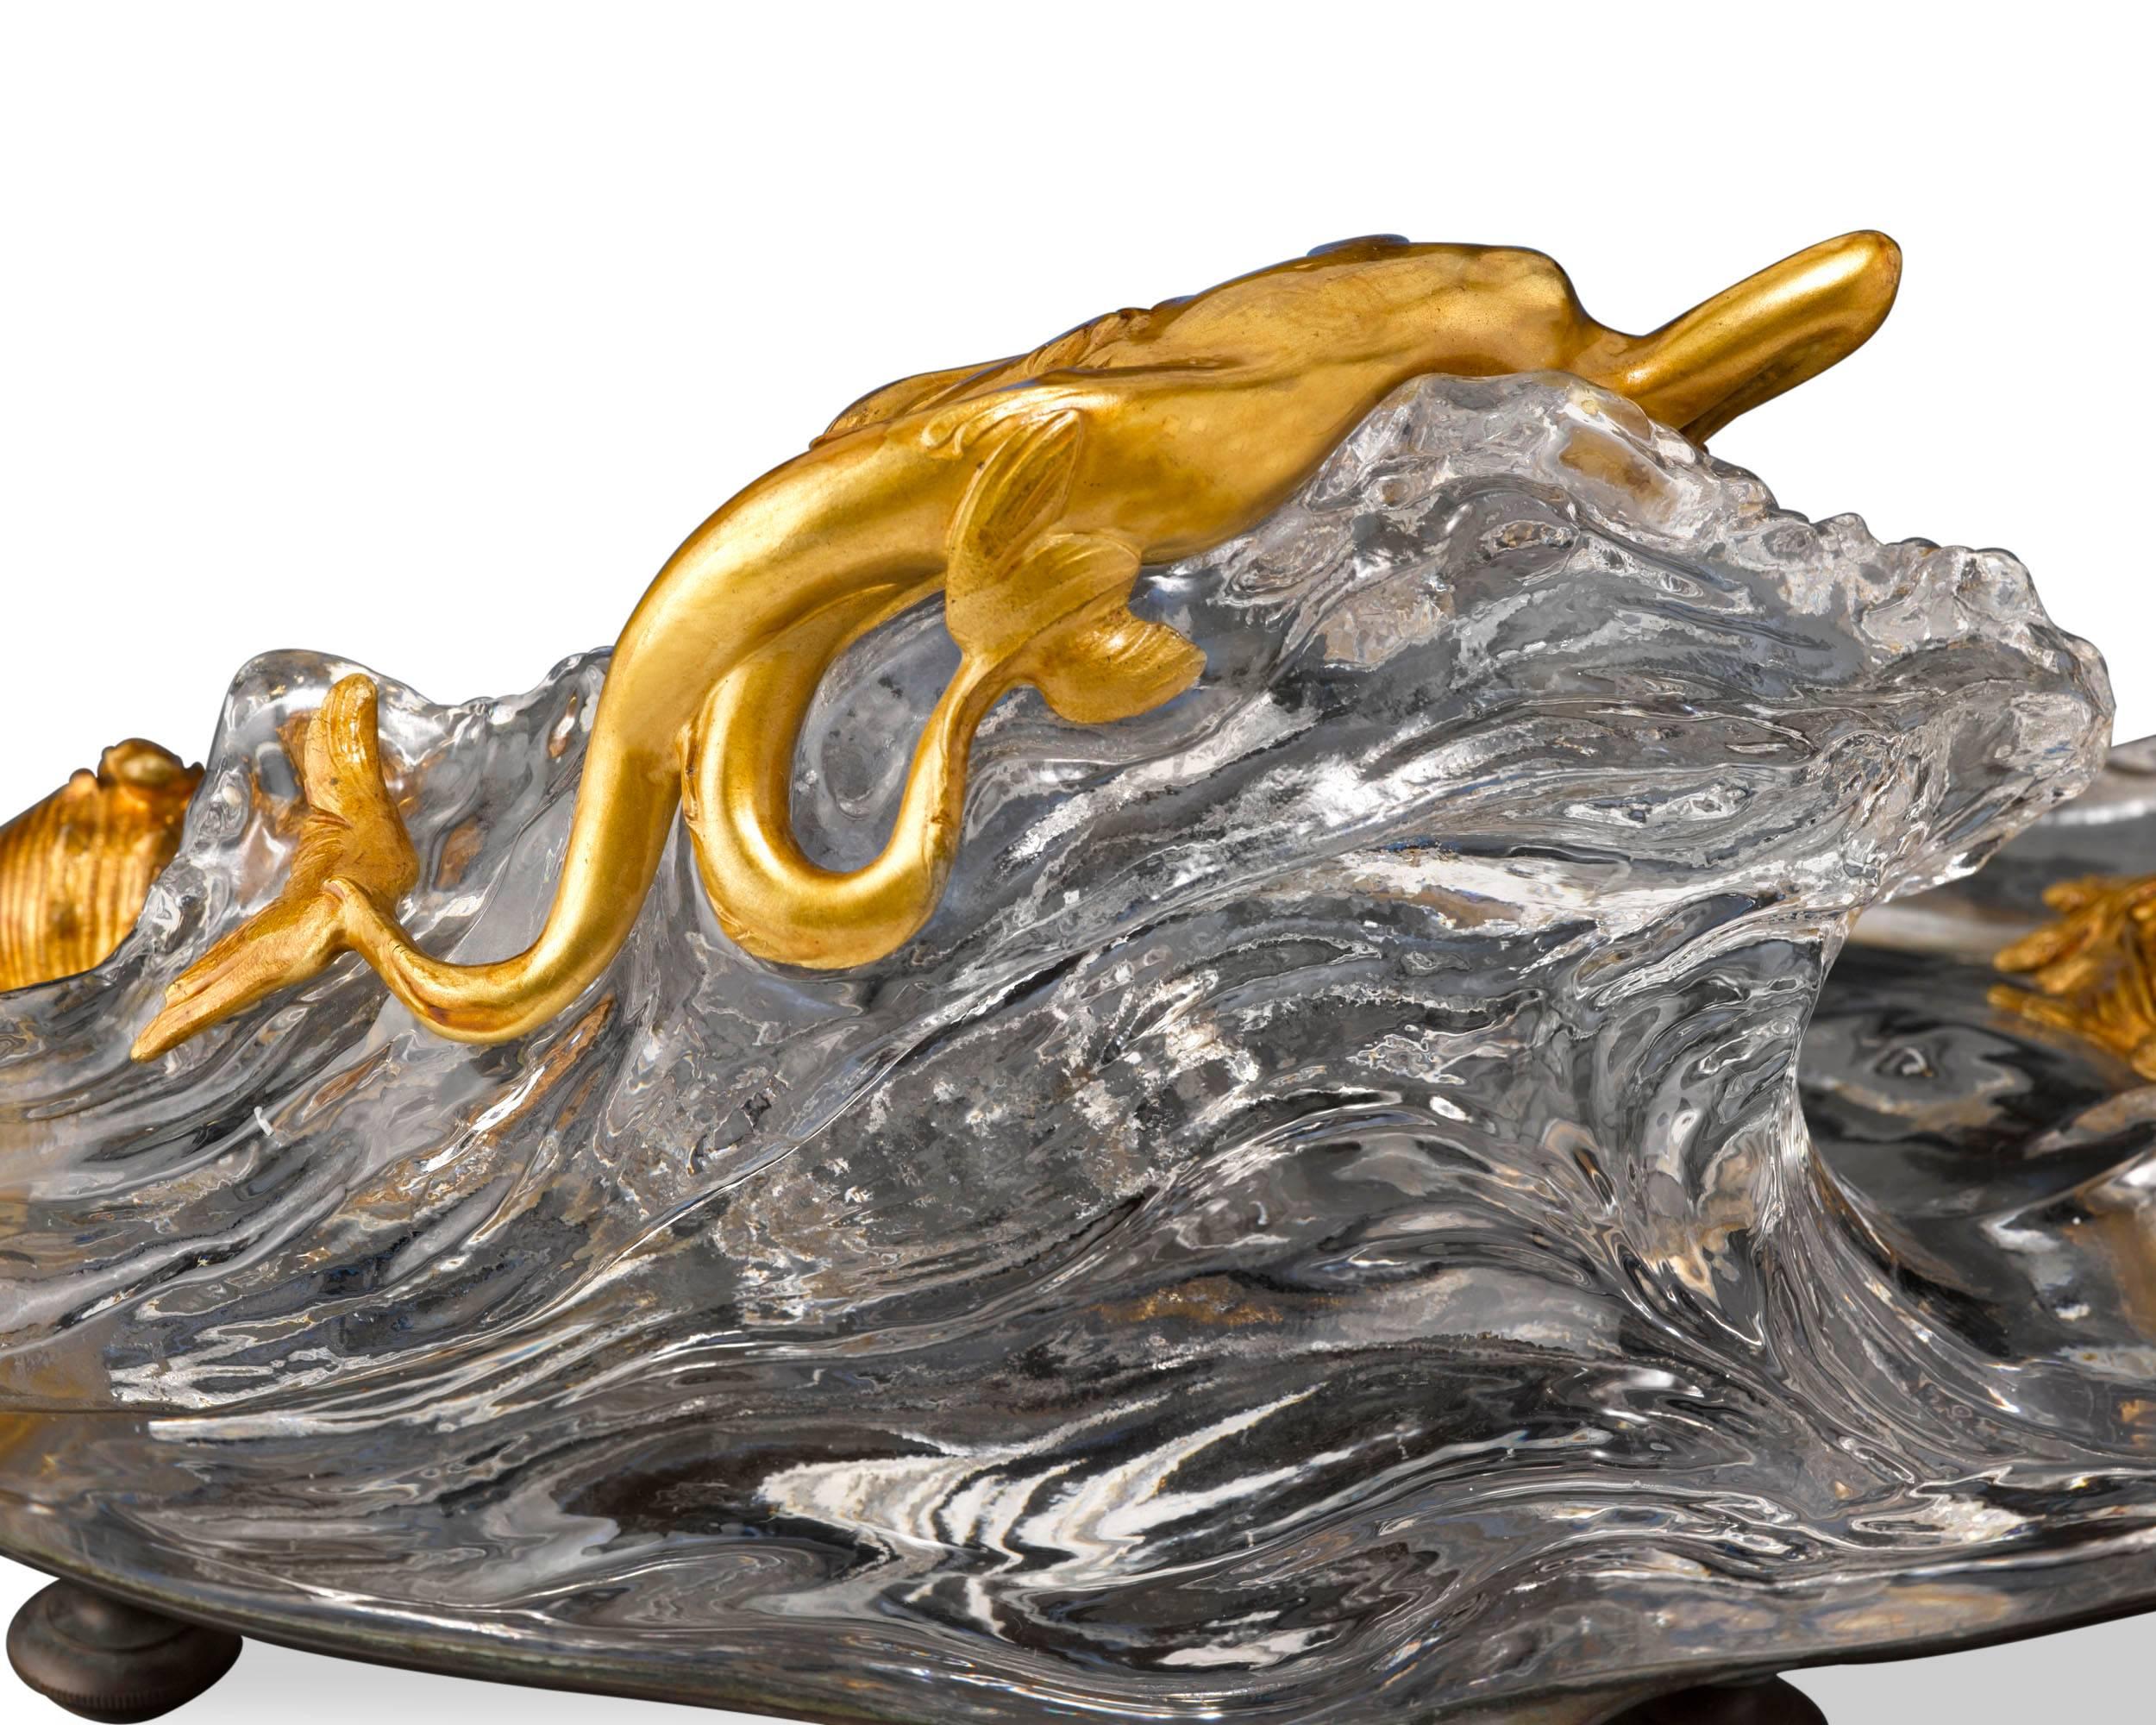 This extraordinary crystal inkwell from the renowned Baccarat is a piece of exquisite charm and grace. Featuring a doré bronze mermaid languishing upon the crest of a rolling wave, it effortlessly embodies the organic movement so treasured by Art